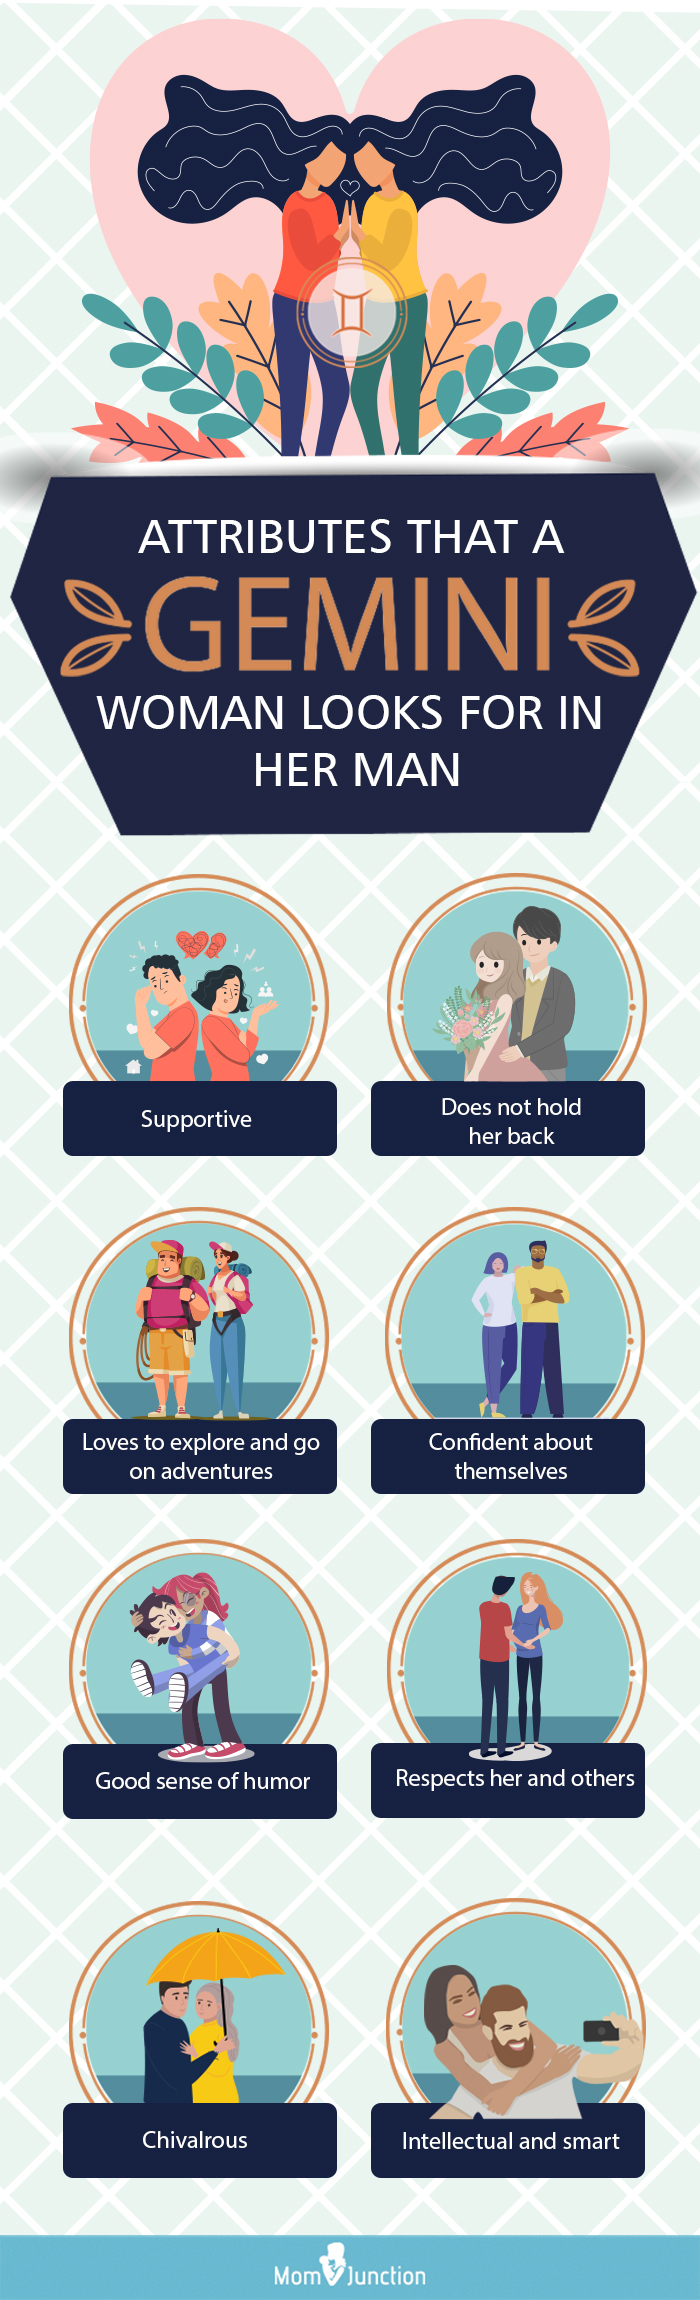 what traits does a gemini woman look for in a man (infographic)